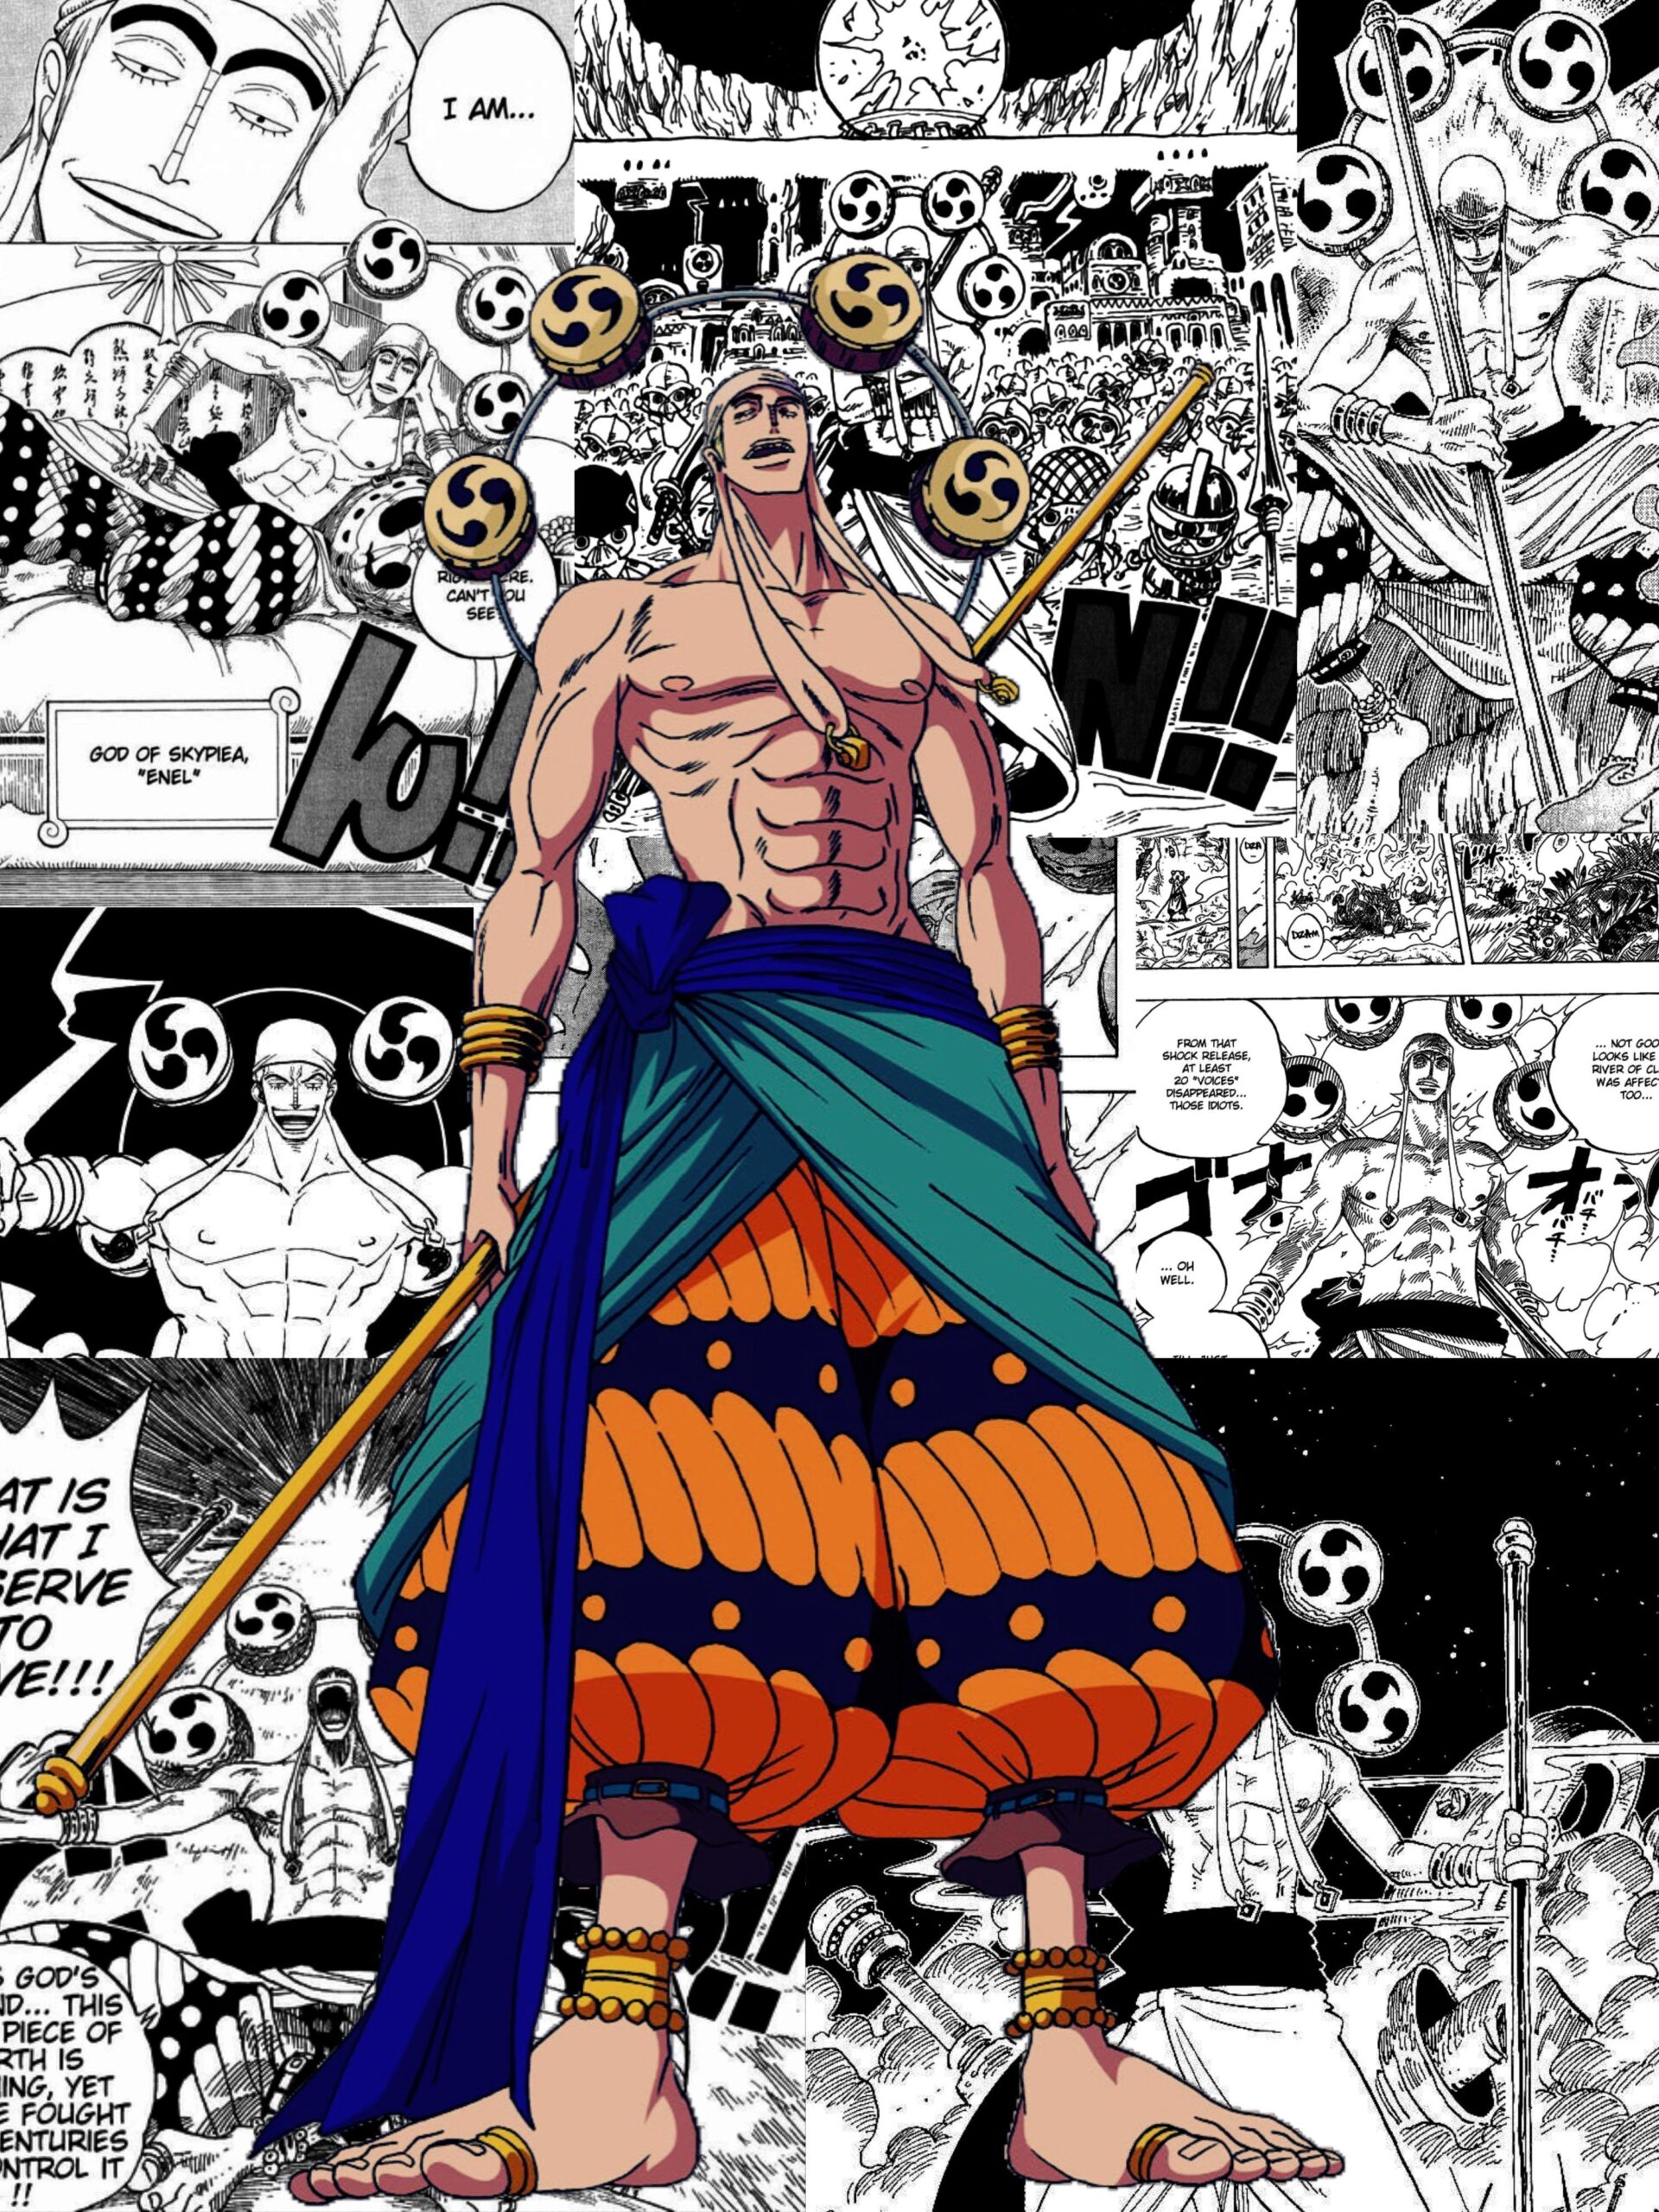 Eneru Hd Wallpapers For Pc, One Piece, Anime